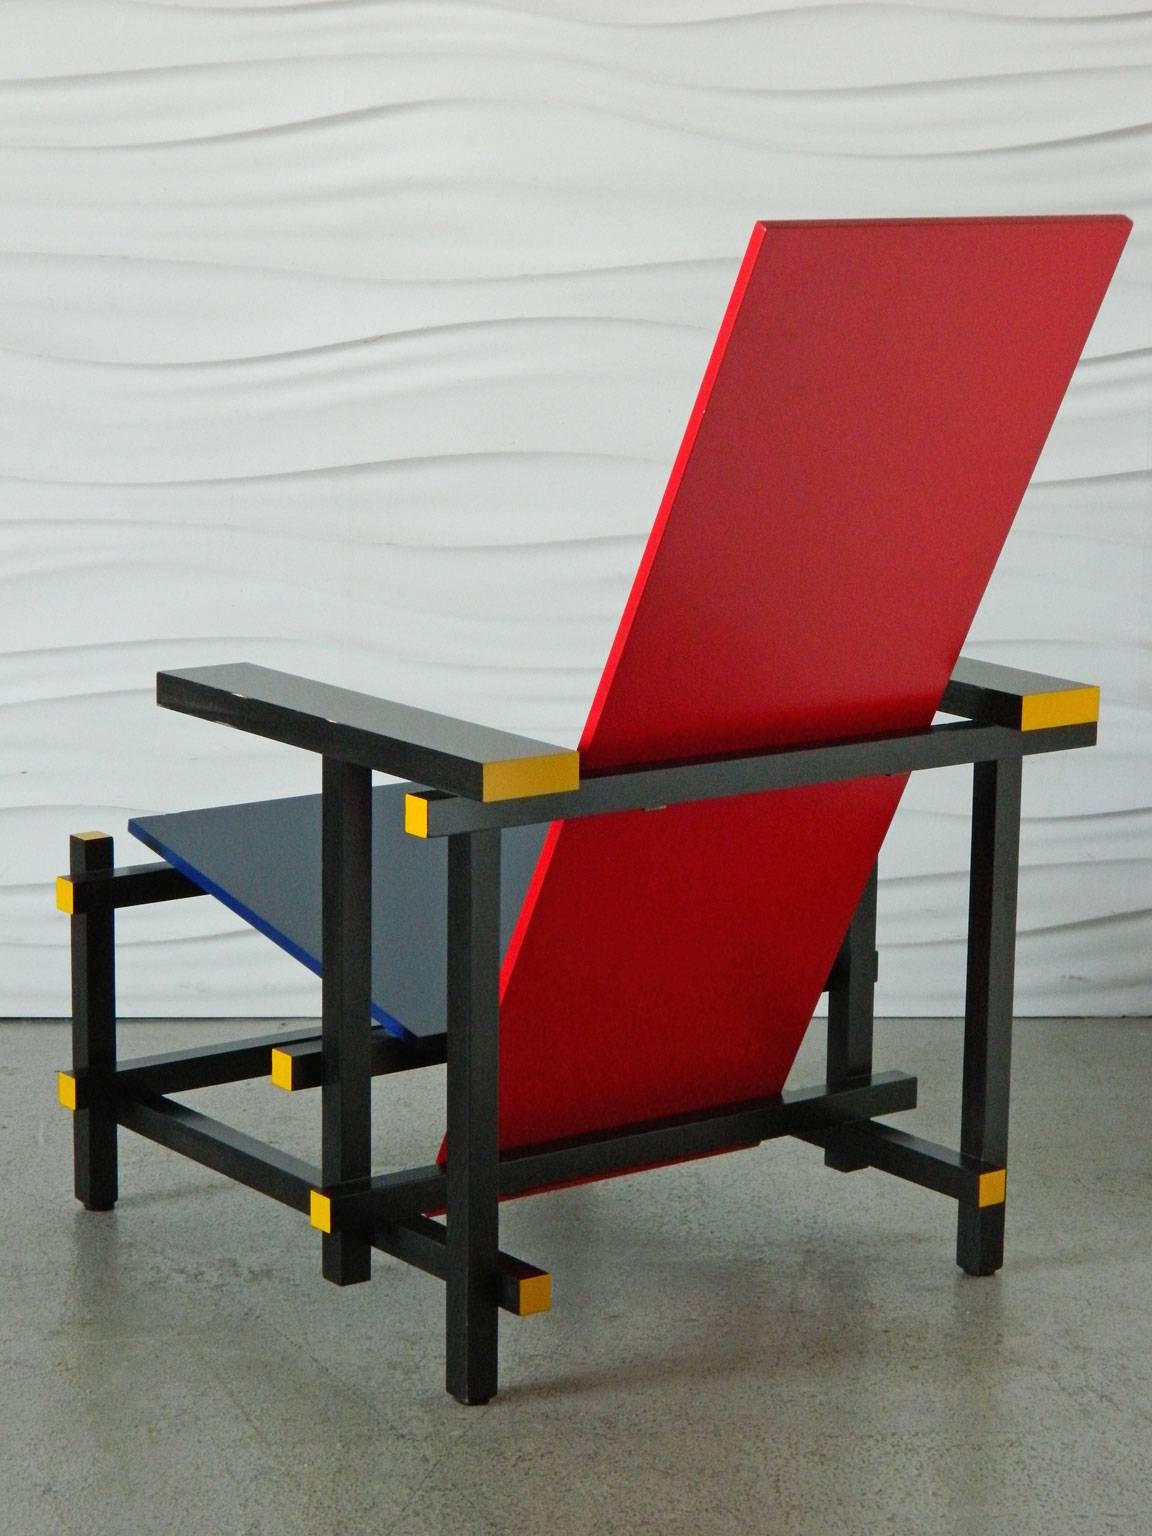 Originally designed in 1917 during the De Stijl art movement by Gerrit Thomas Rietveld, the Red and Blue chair is by far one of the most iconic chairs ever designed. This re-edition was manufactured in Italy by Cassina.